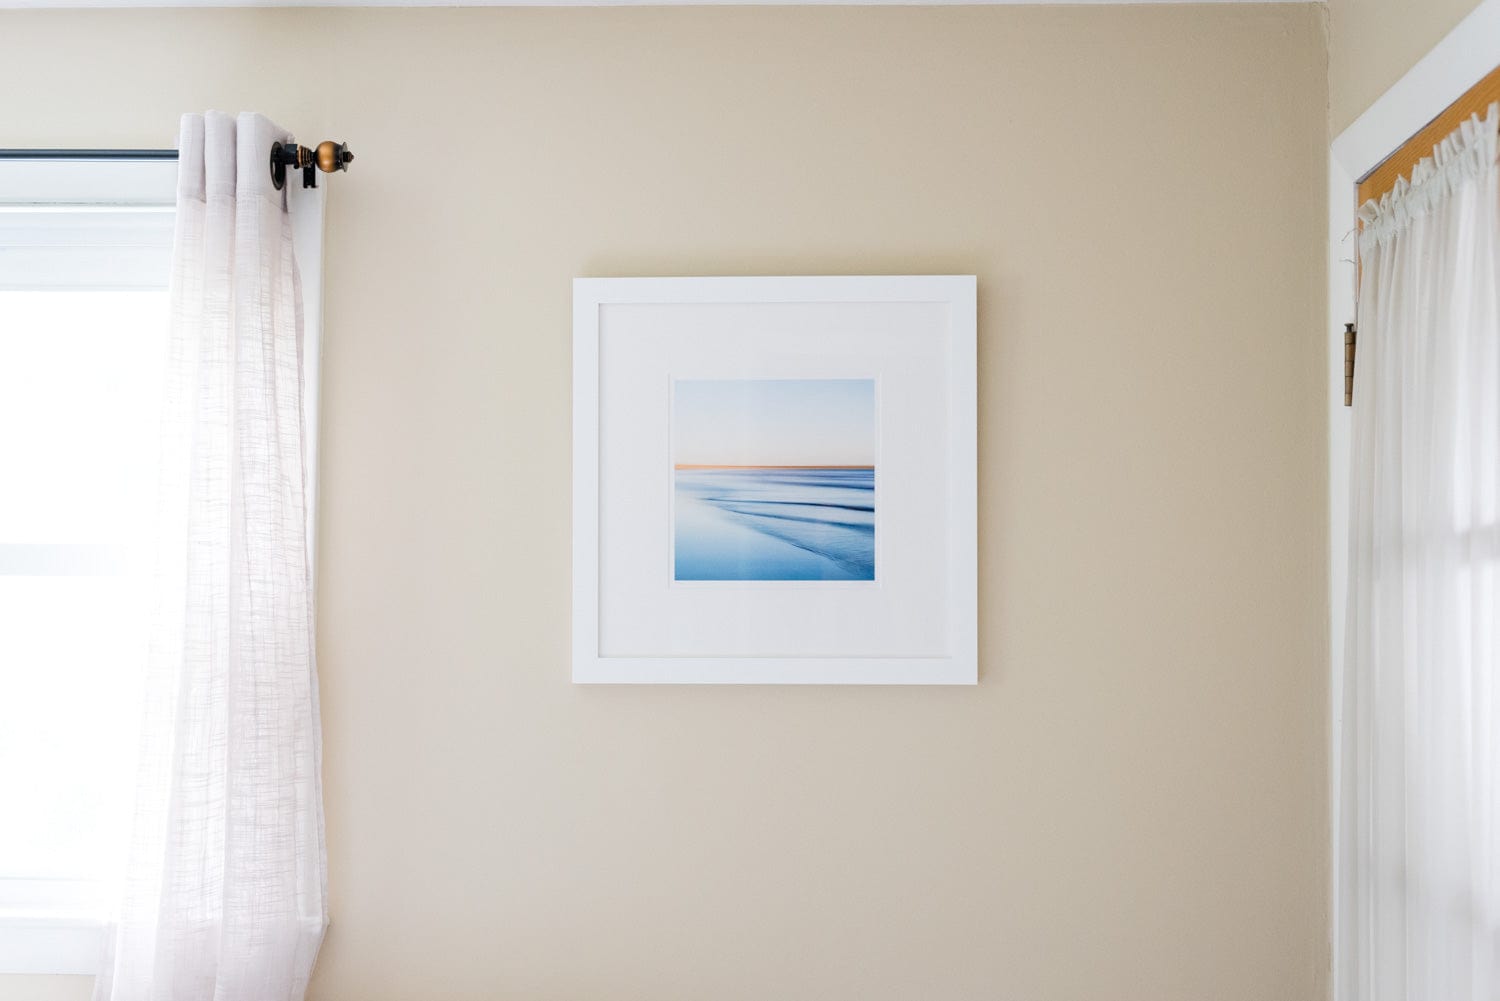 Cate Brown Photo Sachuest Abstract #4 // Framed Fine Art 20x20" // Limited Edition 6 of 100 Available Inventory Ocean Fine Art